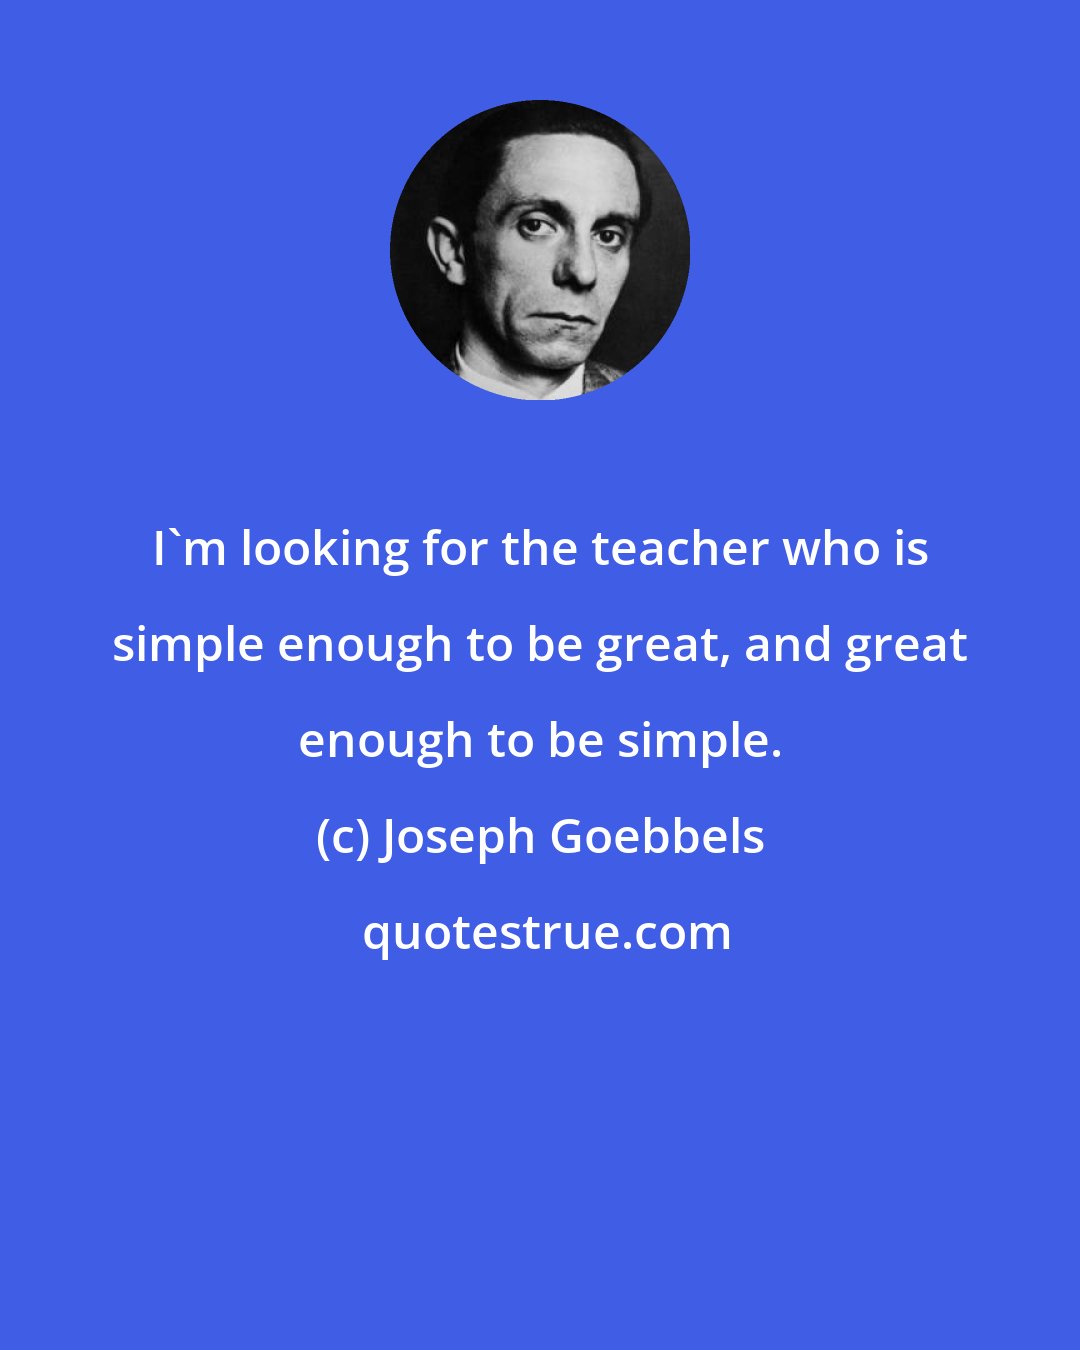 Joseph Goebbels: I'm looking for the teacher who is simple enough to be great, and great enough to be simple.